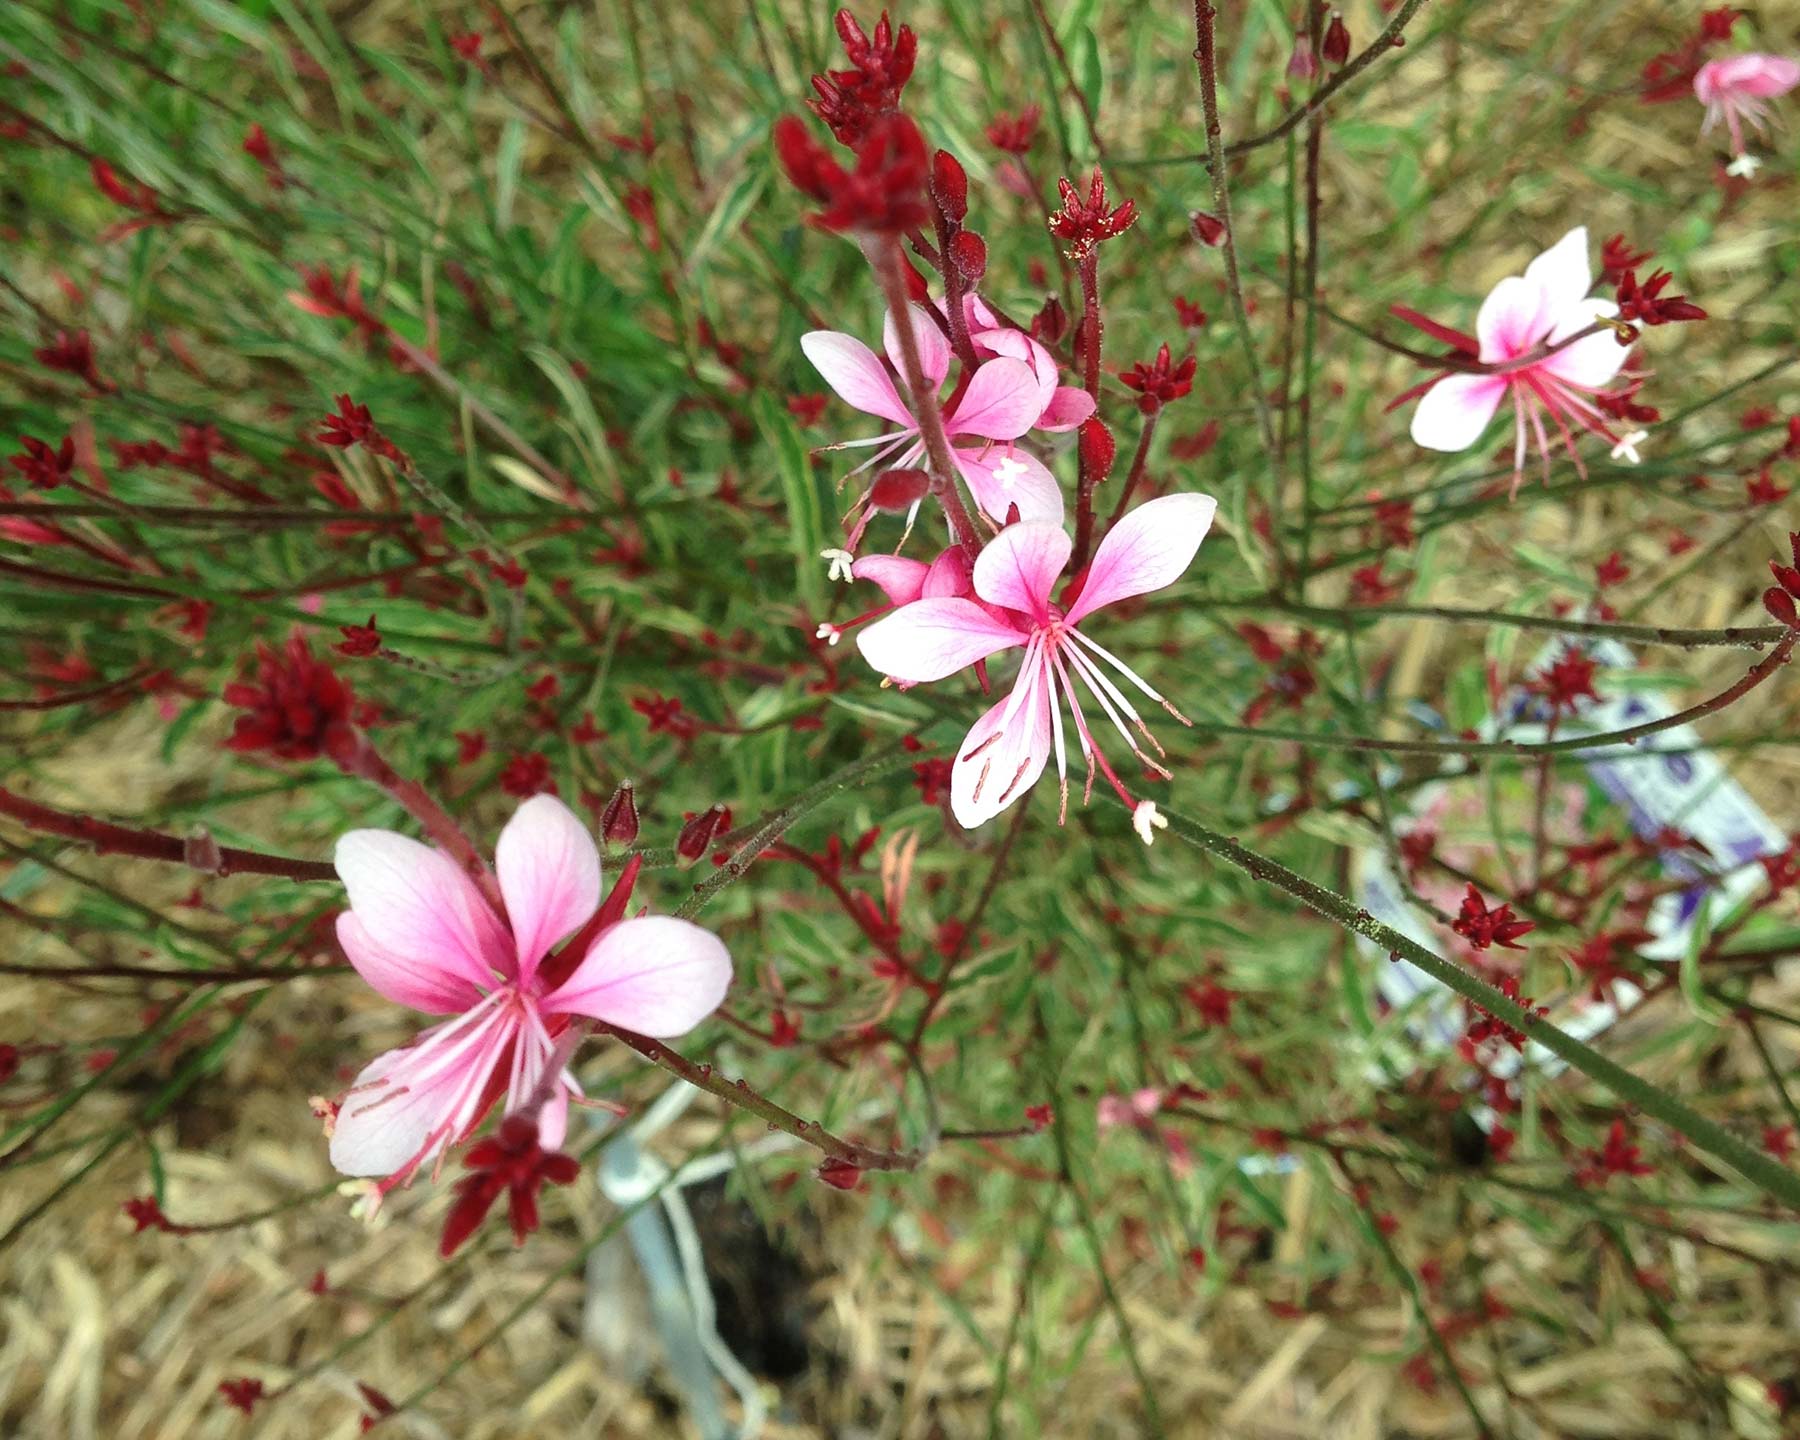 Gaura lindheimeri 'Passionate Rainbow' has bright pink flowers and gold and pink variegated leaves.